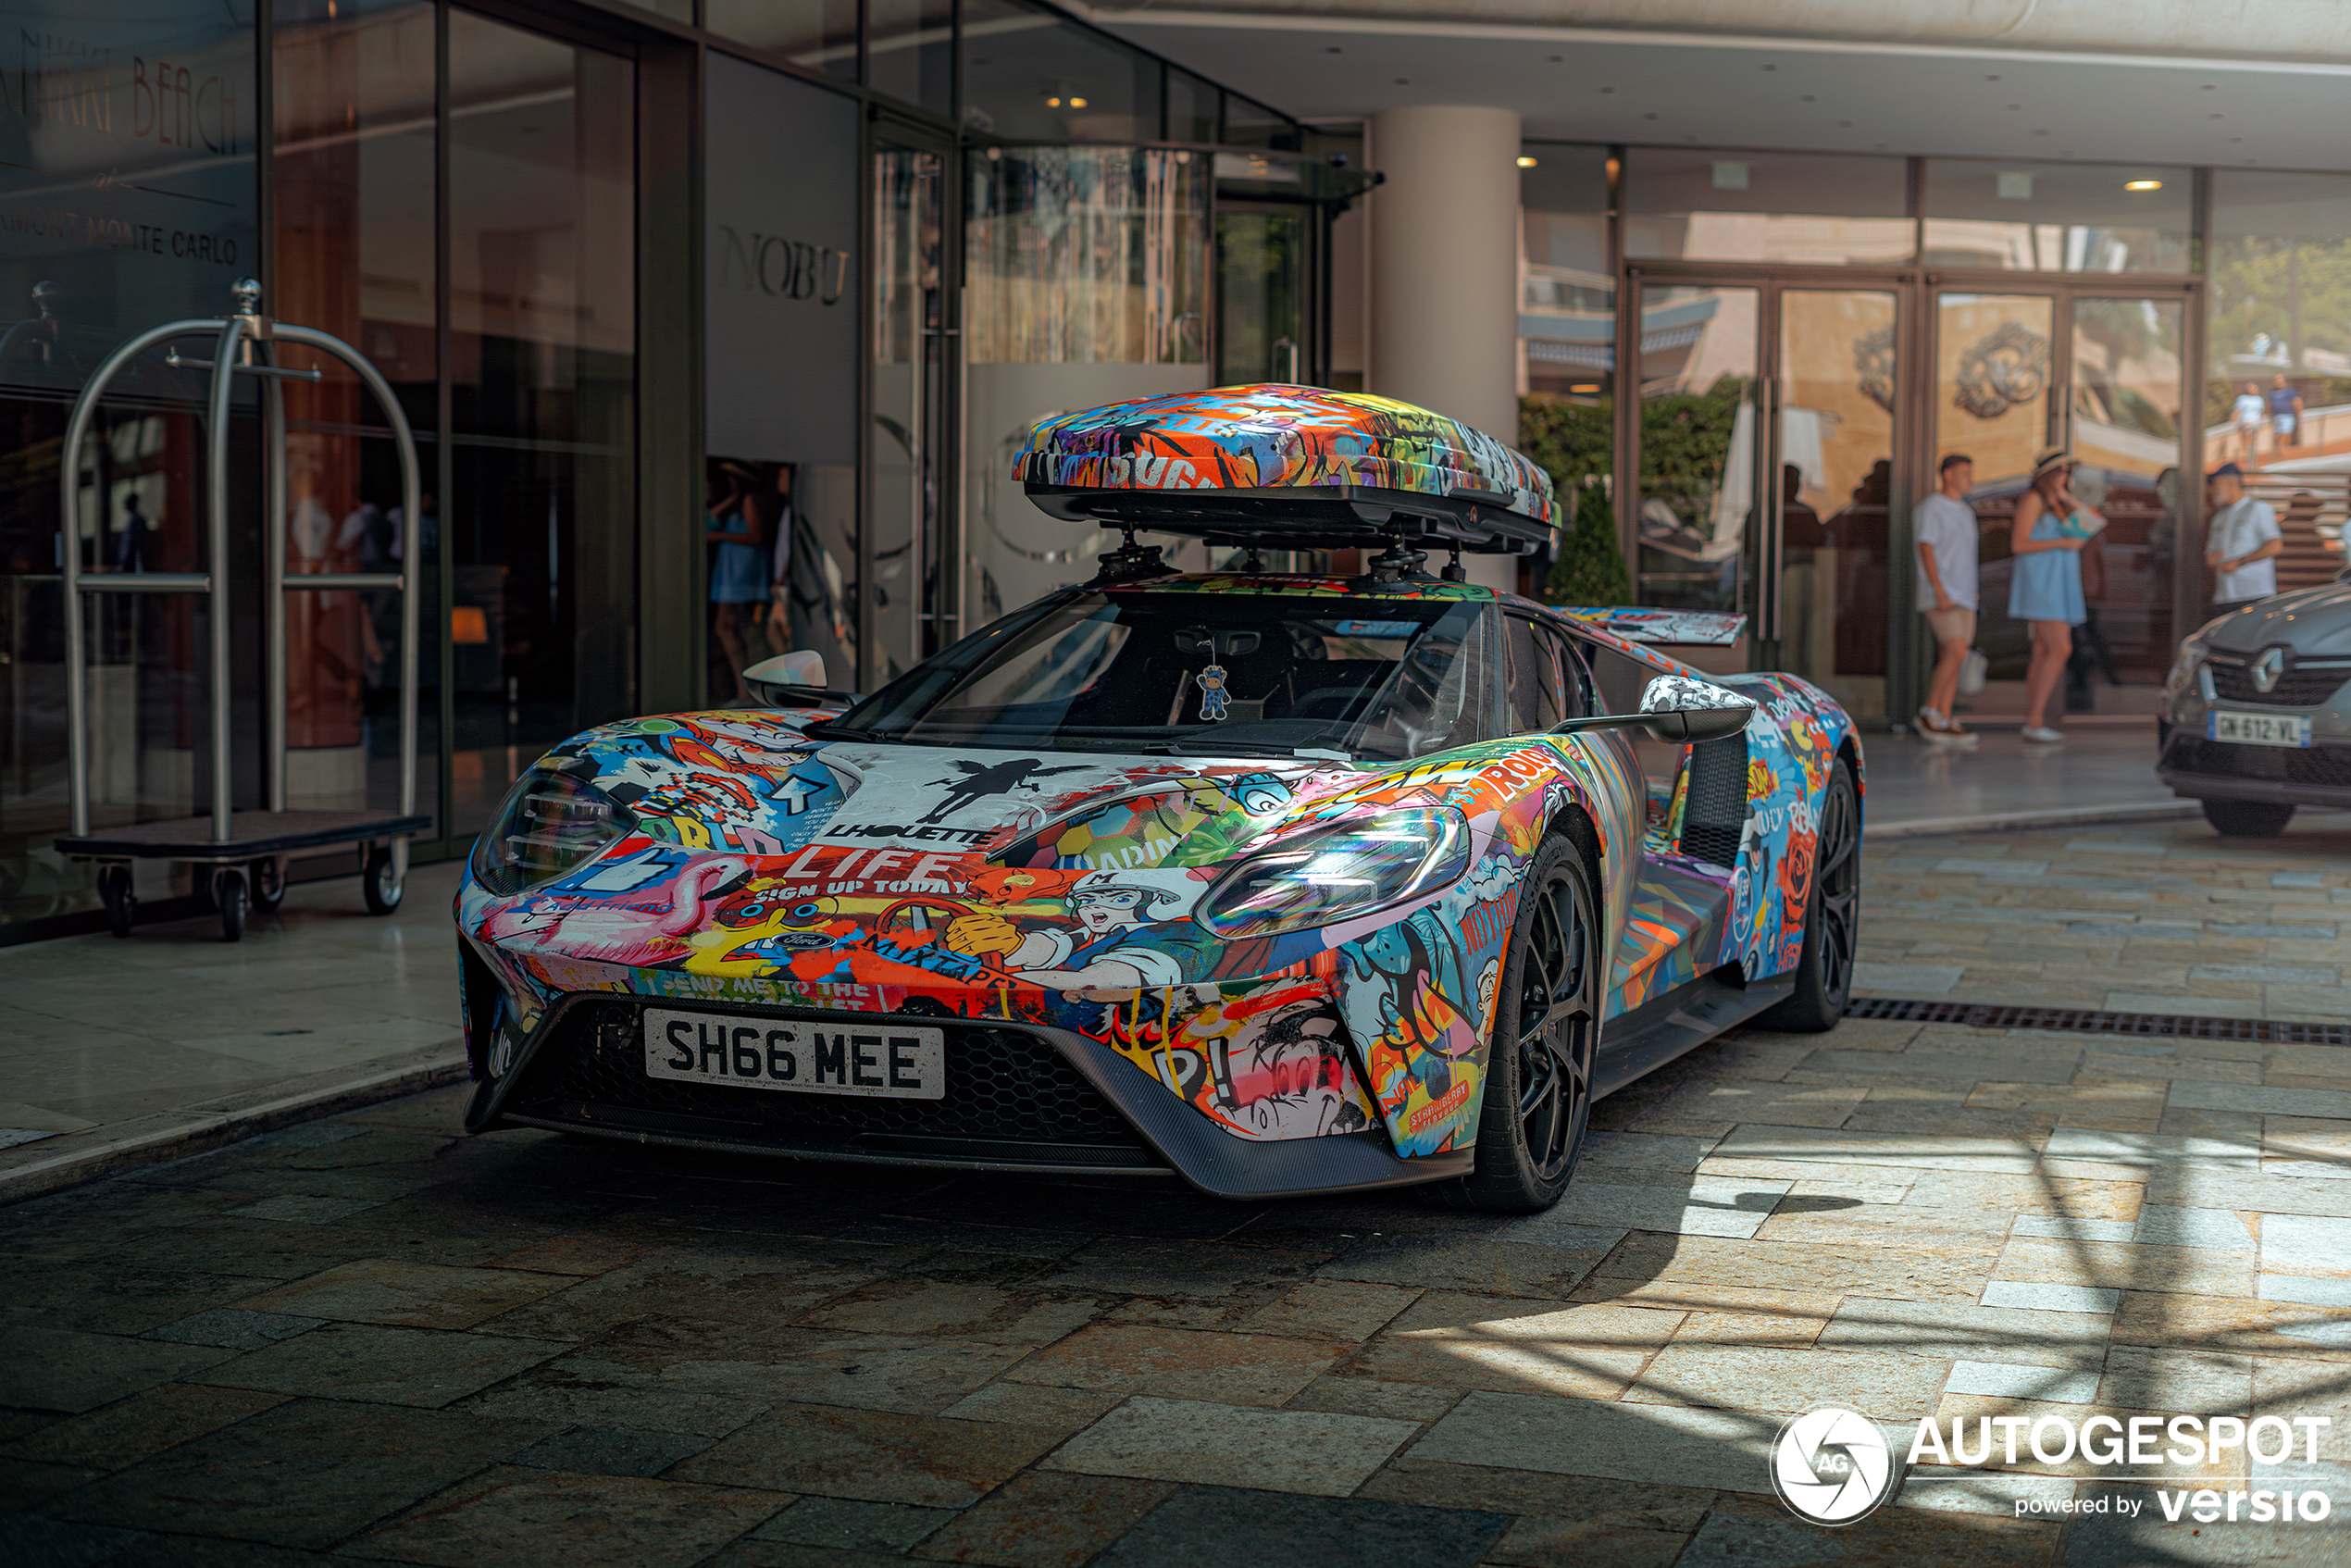 Shmee150 shows up with his modified Ford GT